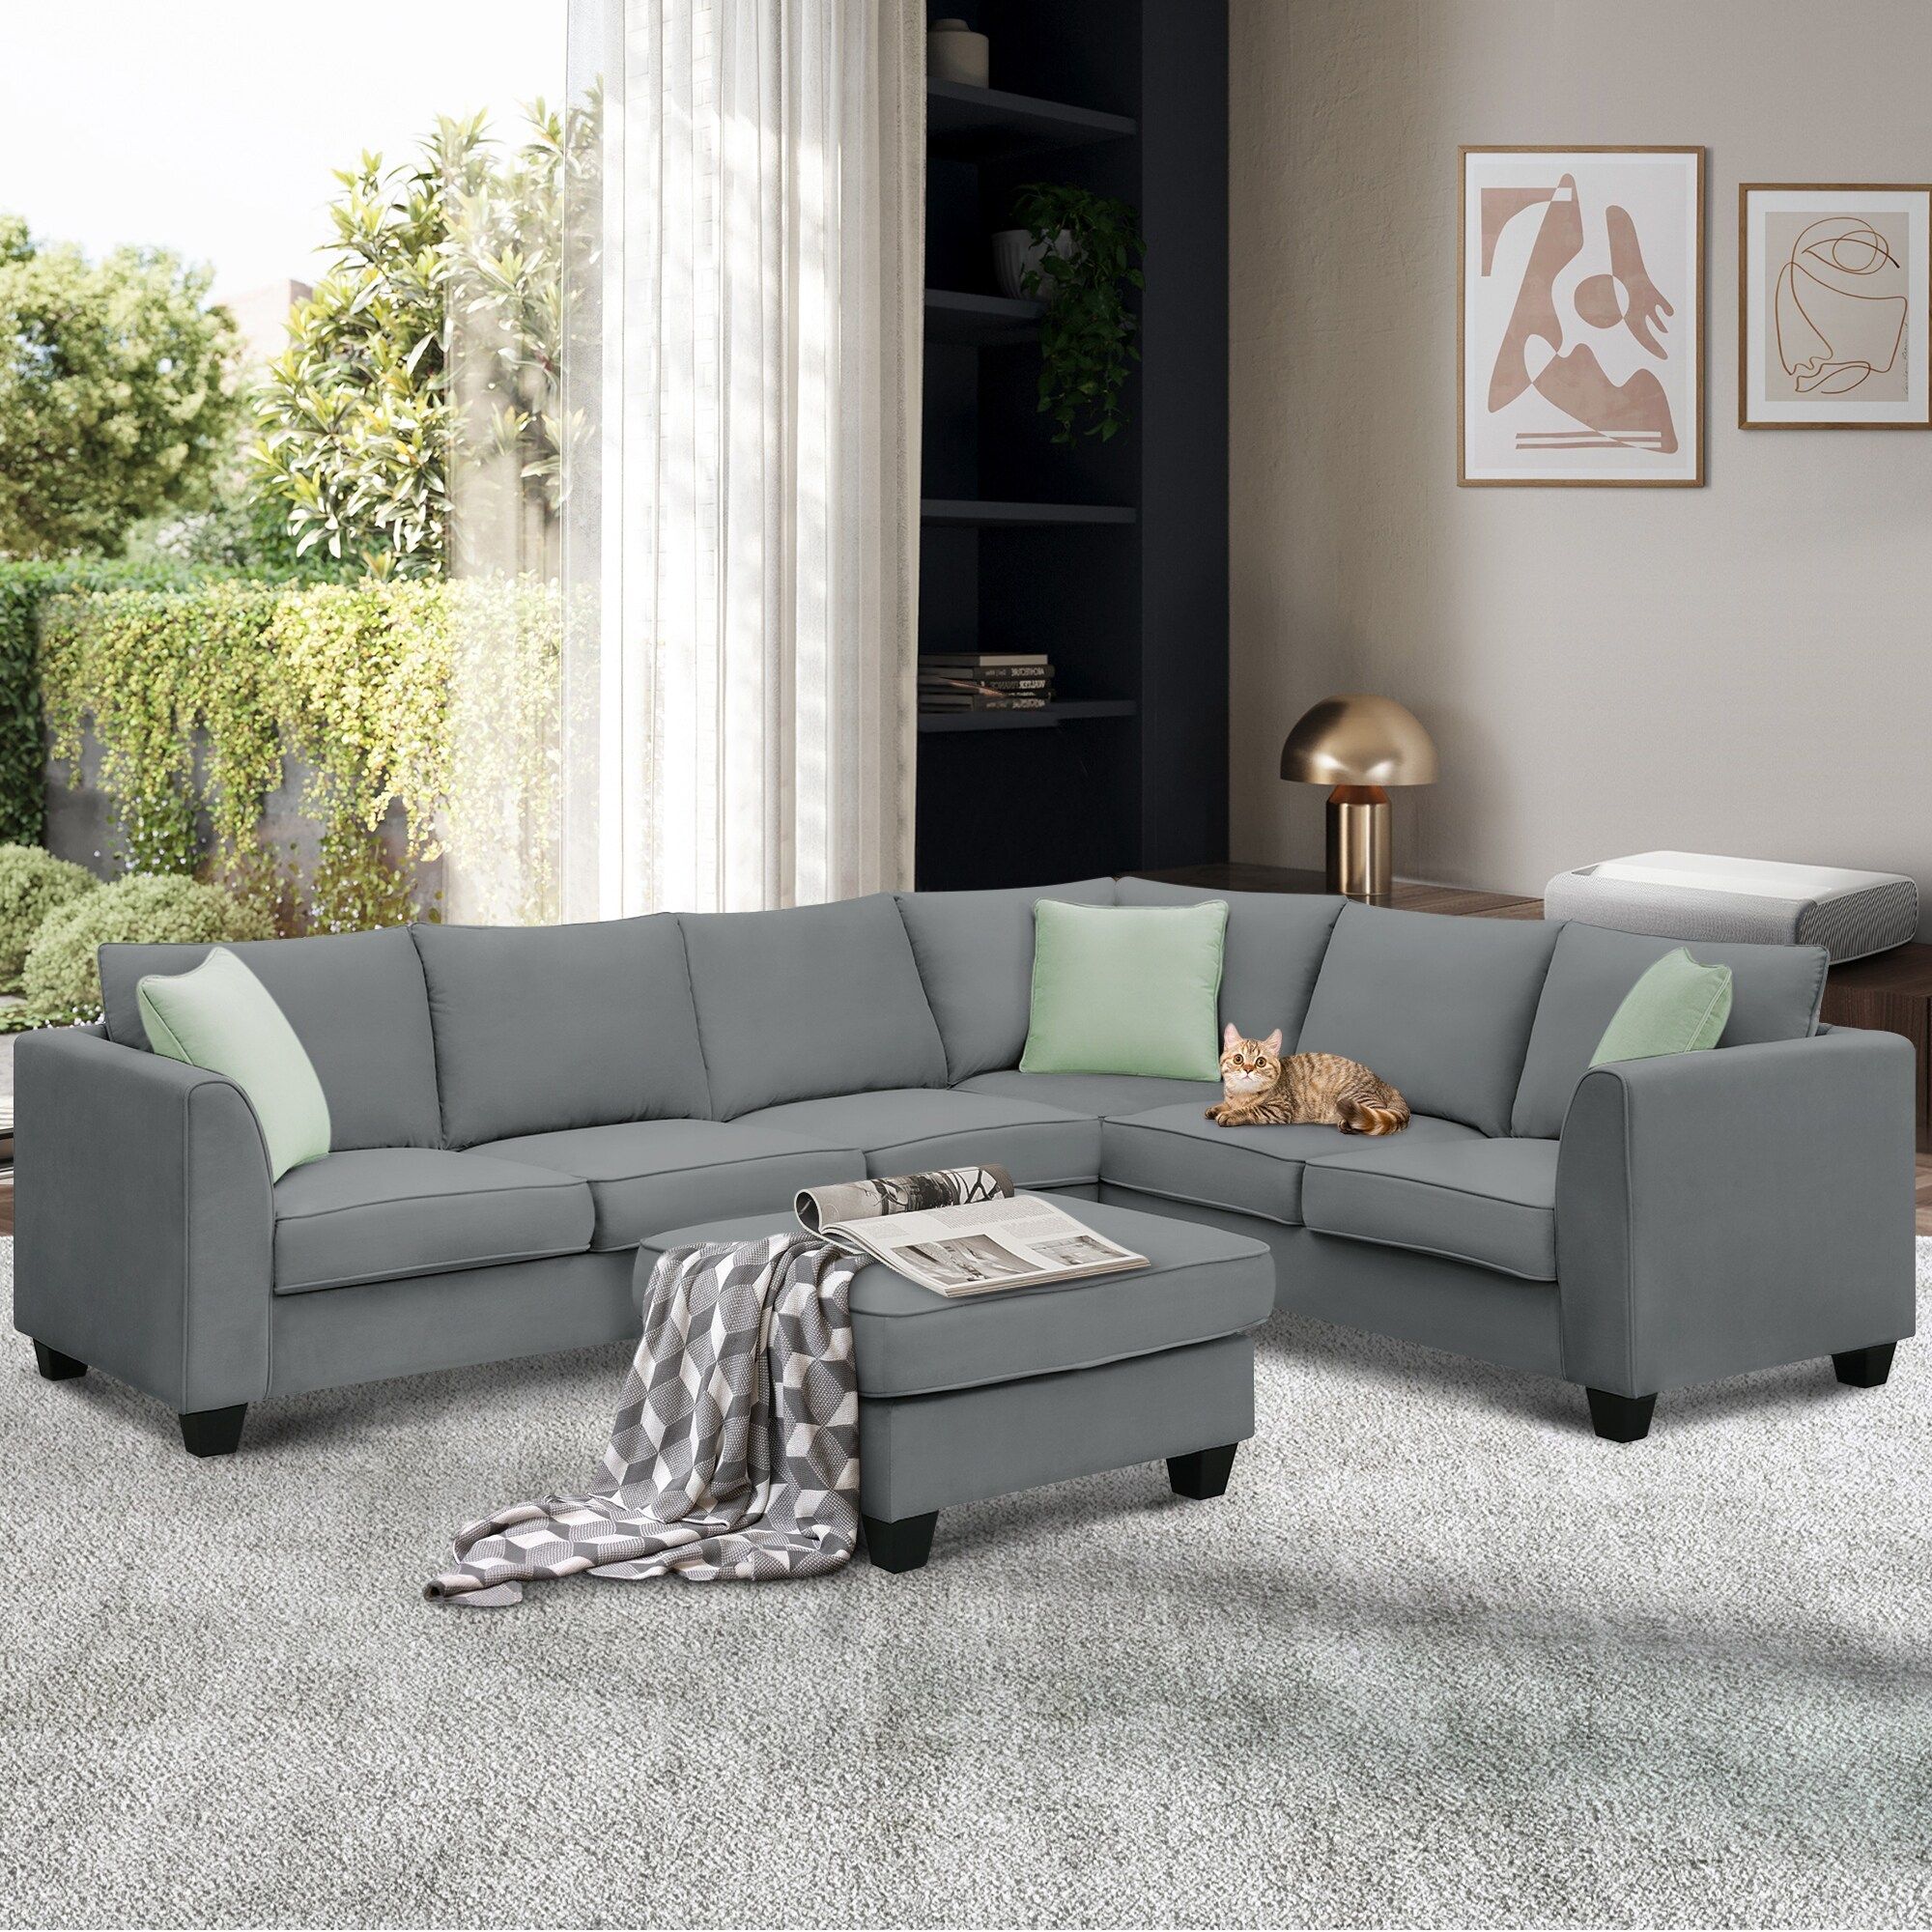 112" Sectional Sofa Couches Living Room Sets 7 Seats Sleeper Sofa With  Ottoman, L Shape Fabric Sofa, Pillow Back Sofa – – 37989197 Throughout Pillowback Sofa Sectionals (View 13 of 15)